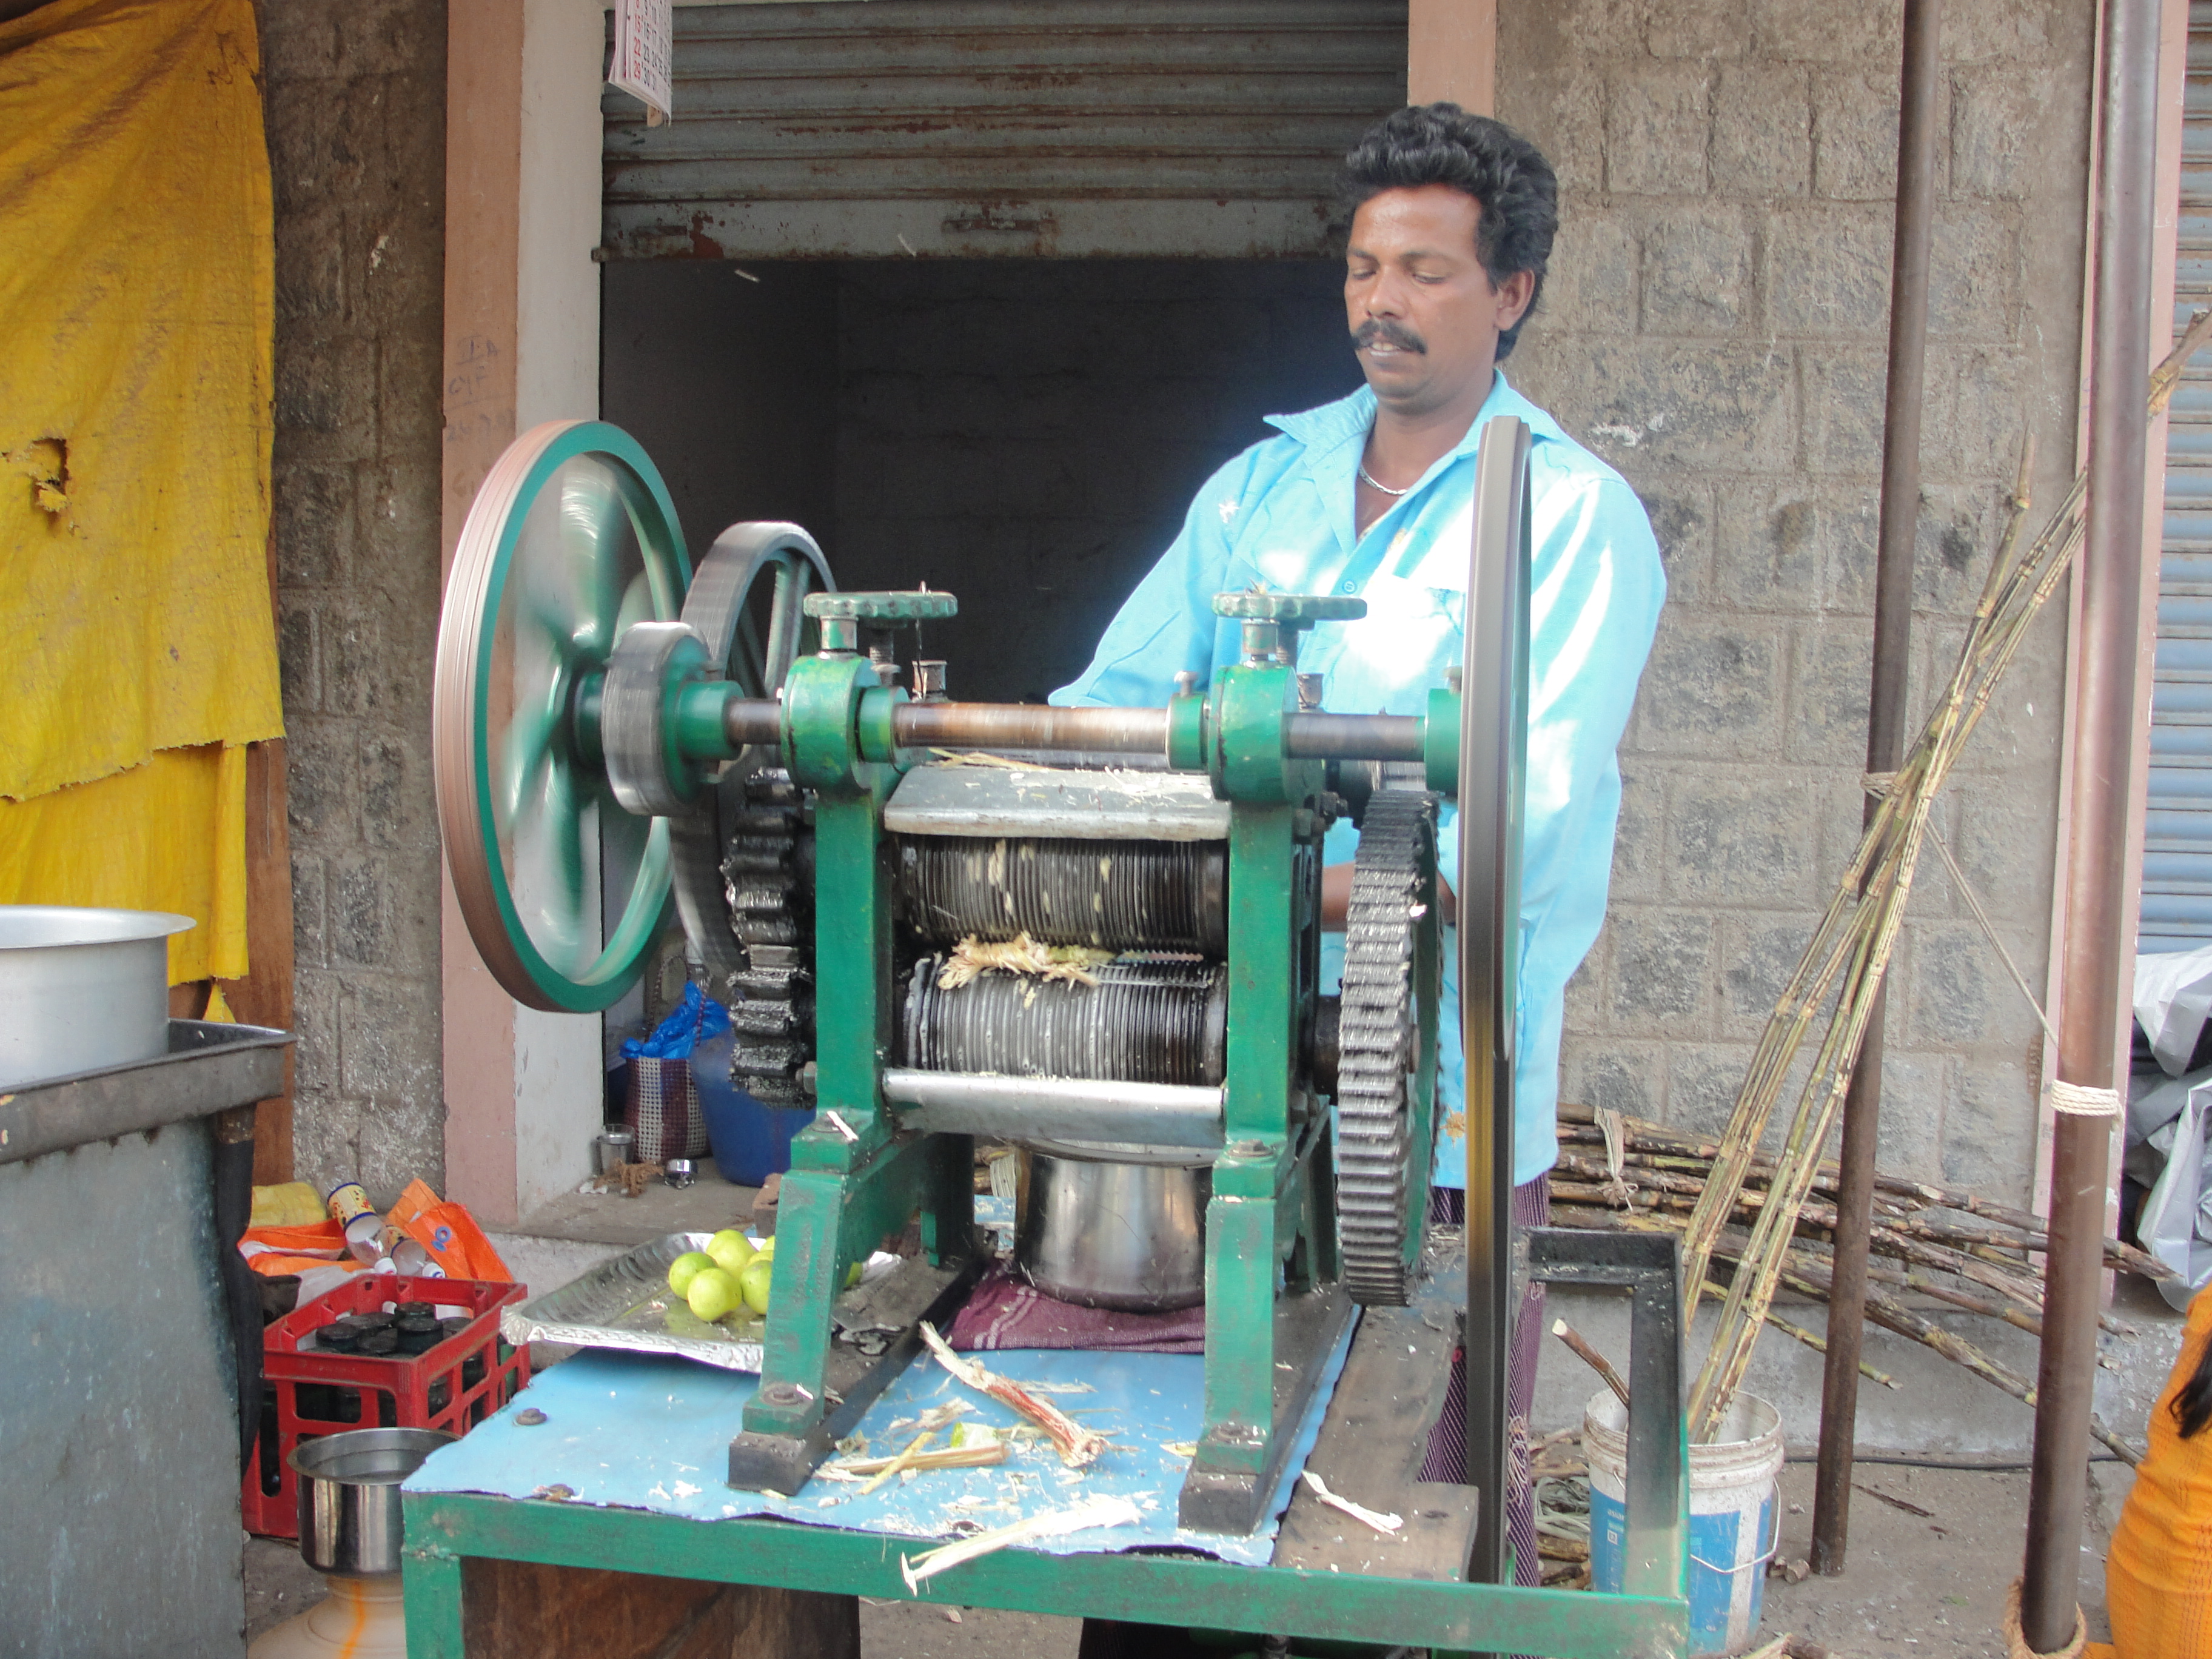 A scene of sugarcane juice extraction